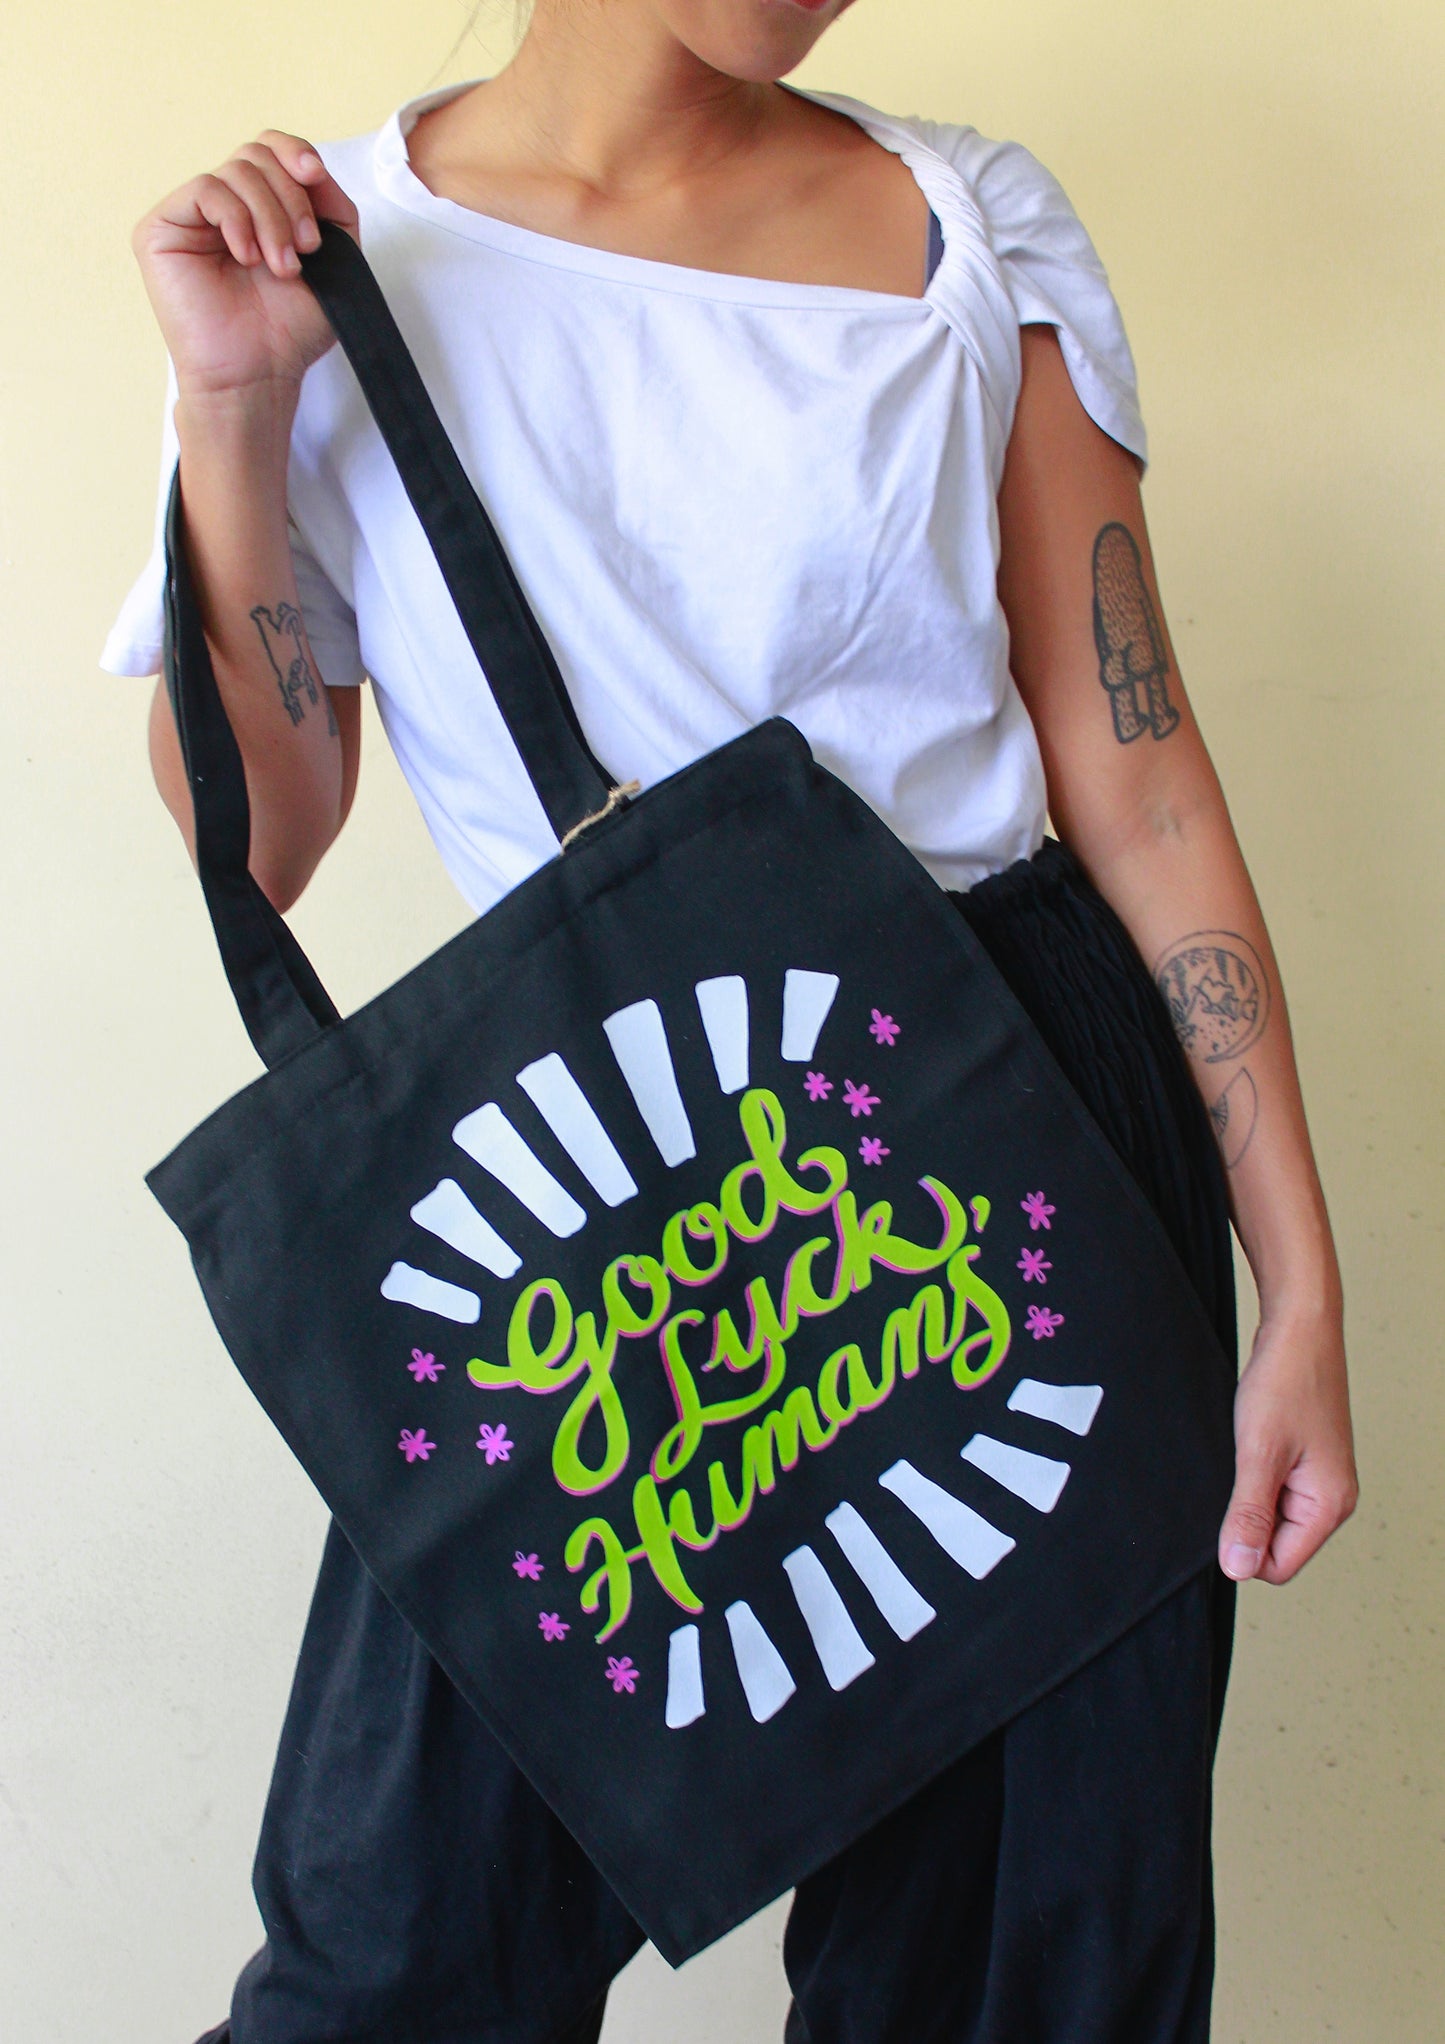 good luck, humans tote - black